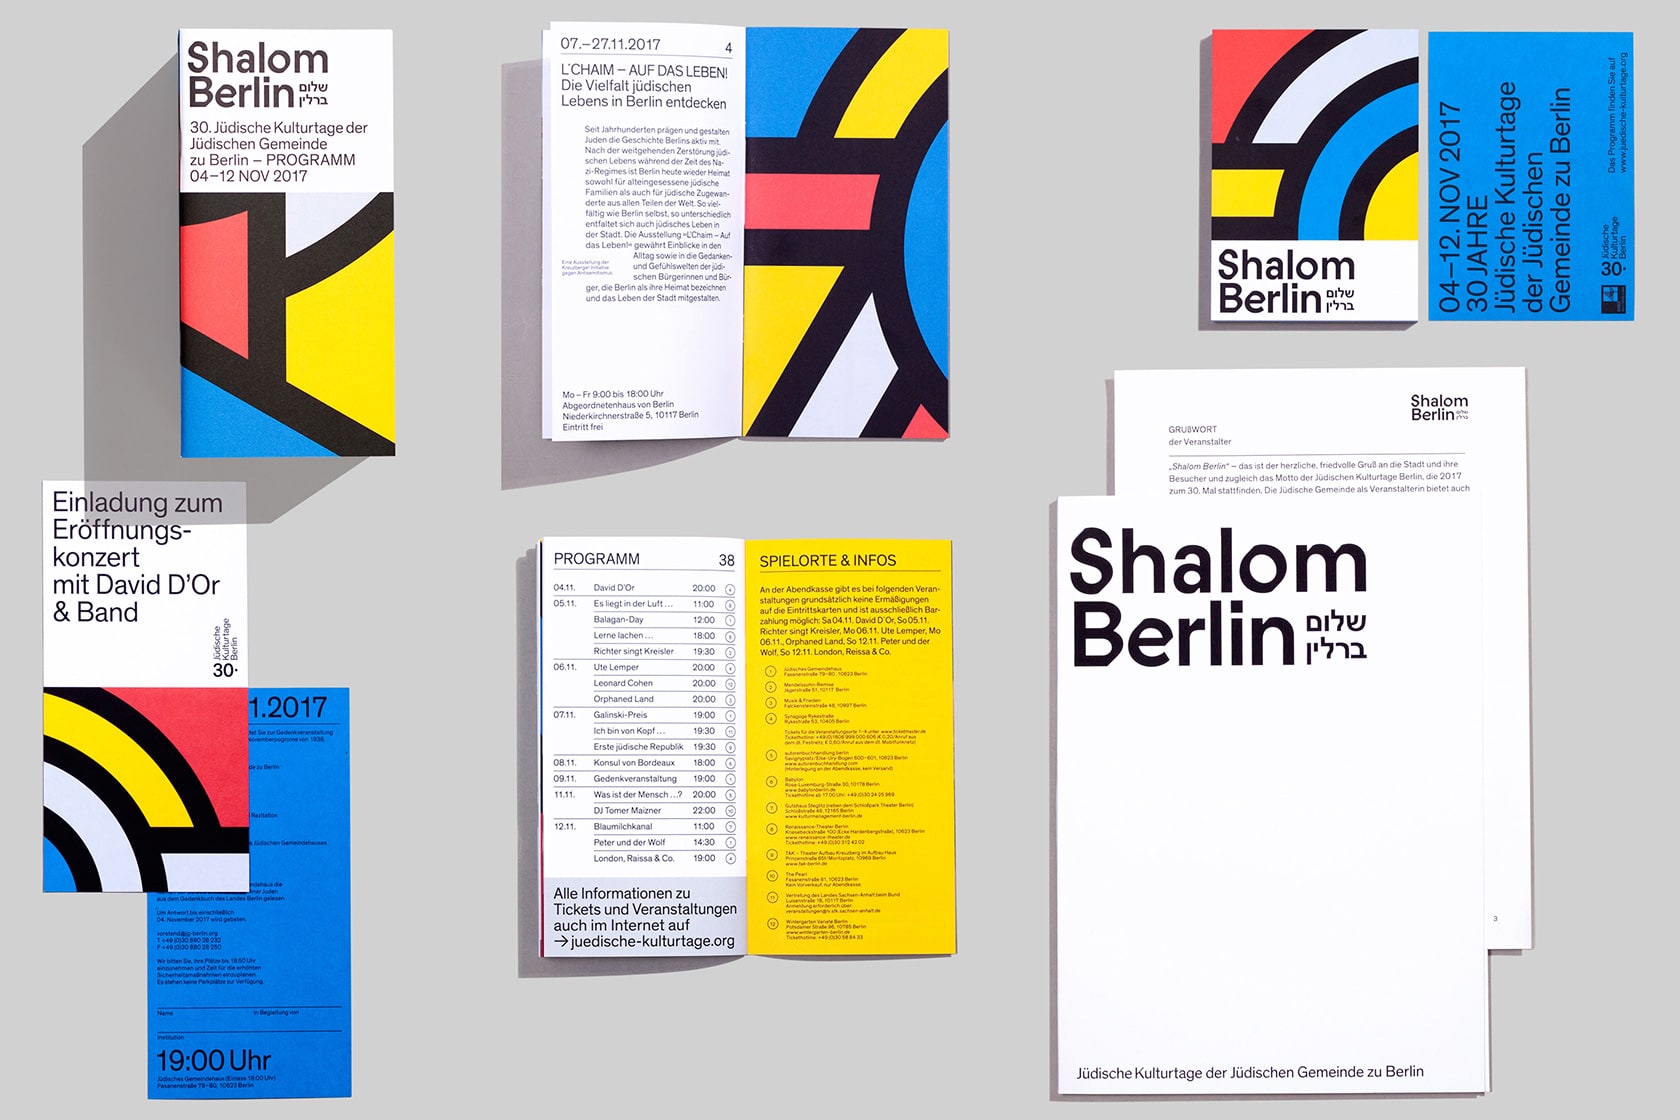 An image of the stationary of the new visual identity for the jewish cultural days 2017